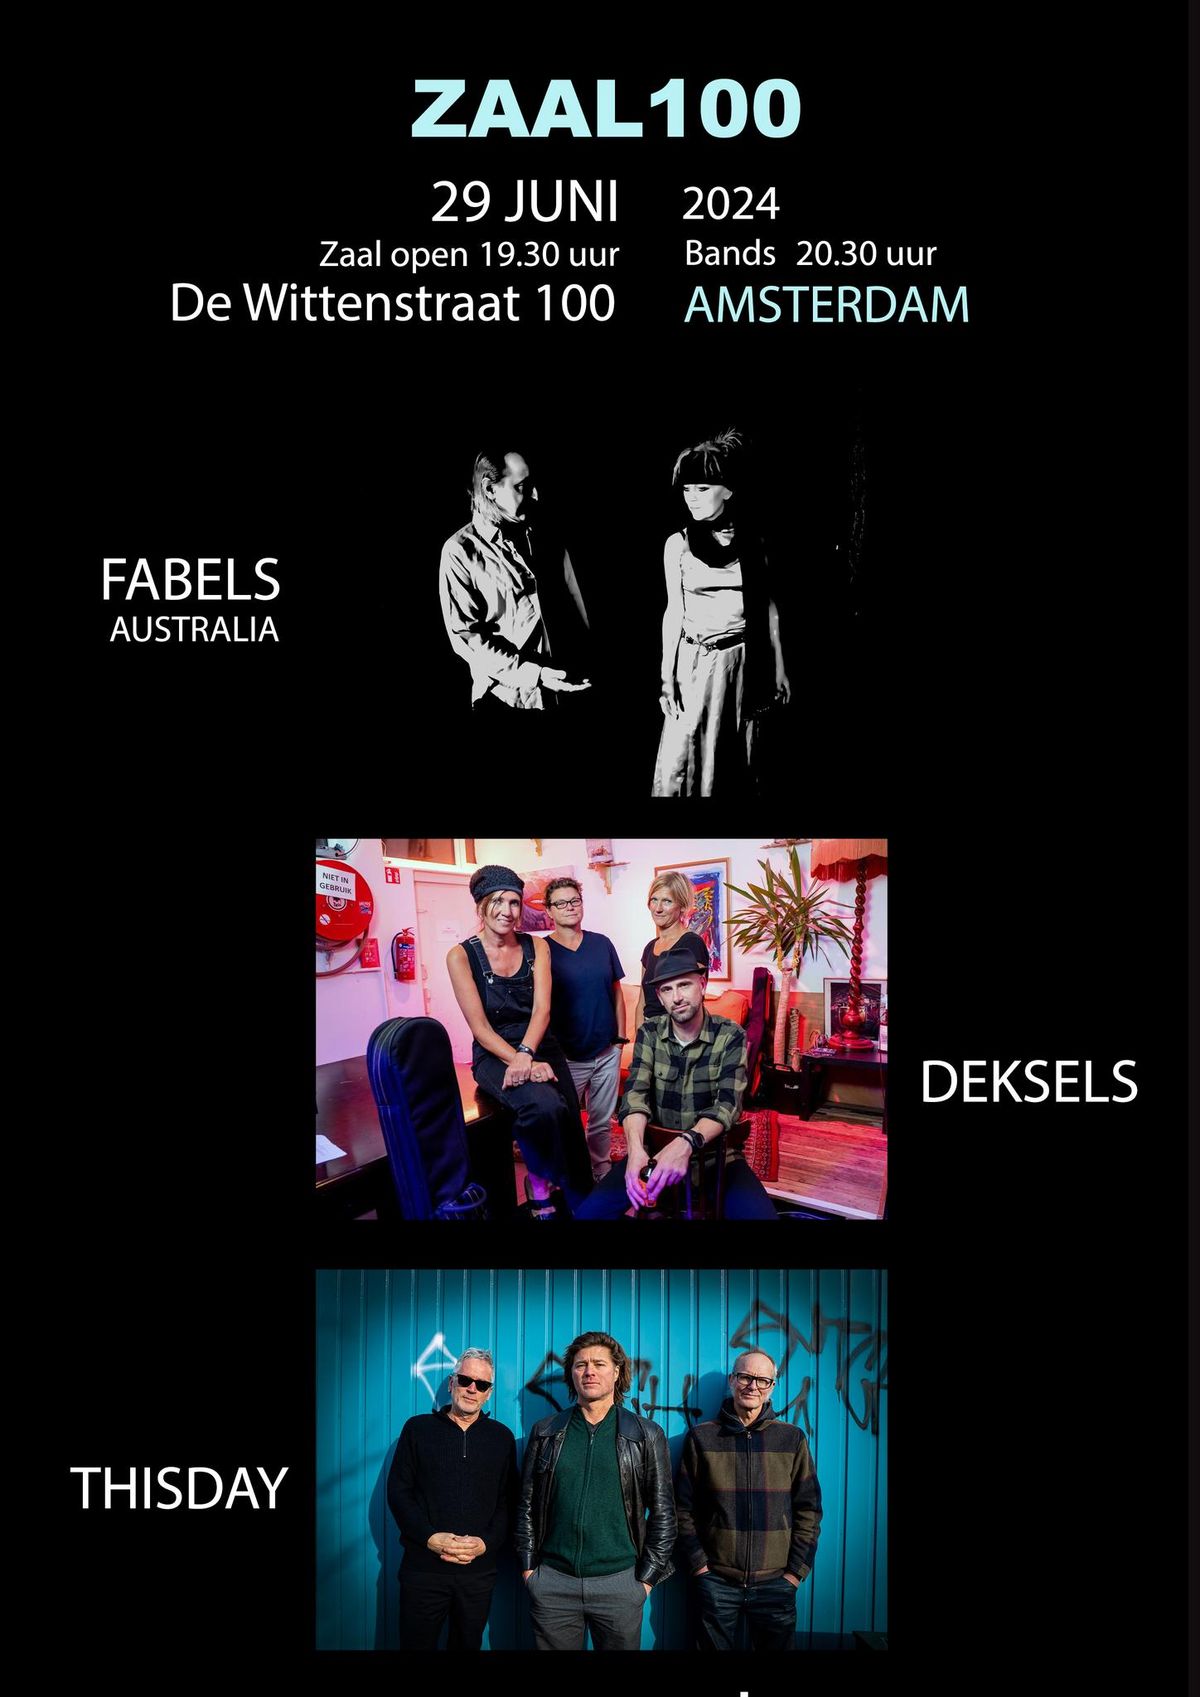 Fabels, Deksels, ThisDay live at ZAAL 100